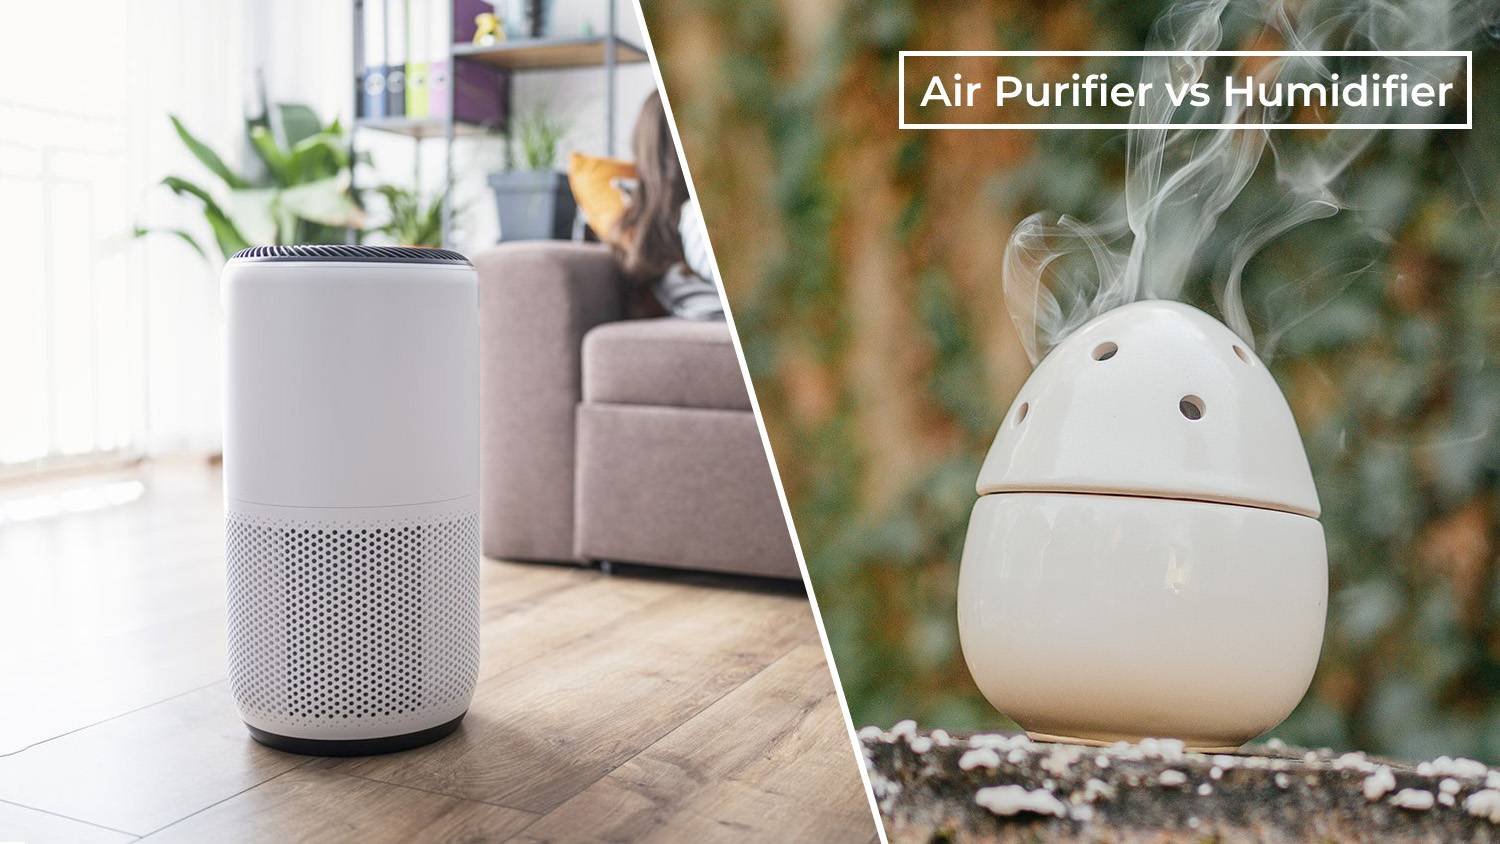 Air Purifiers vs. Humidifiers? Why Not Both? Your Guide to Using Them Together